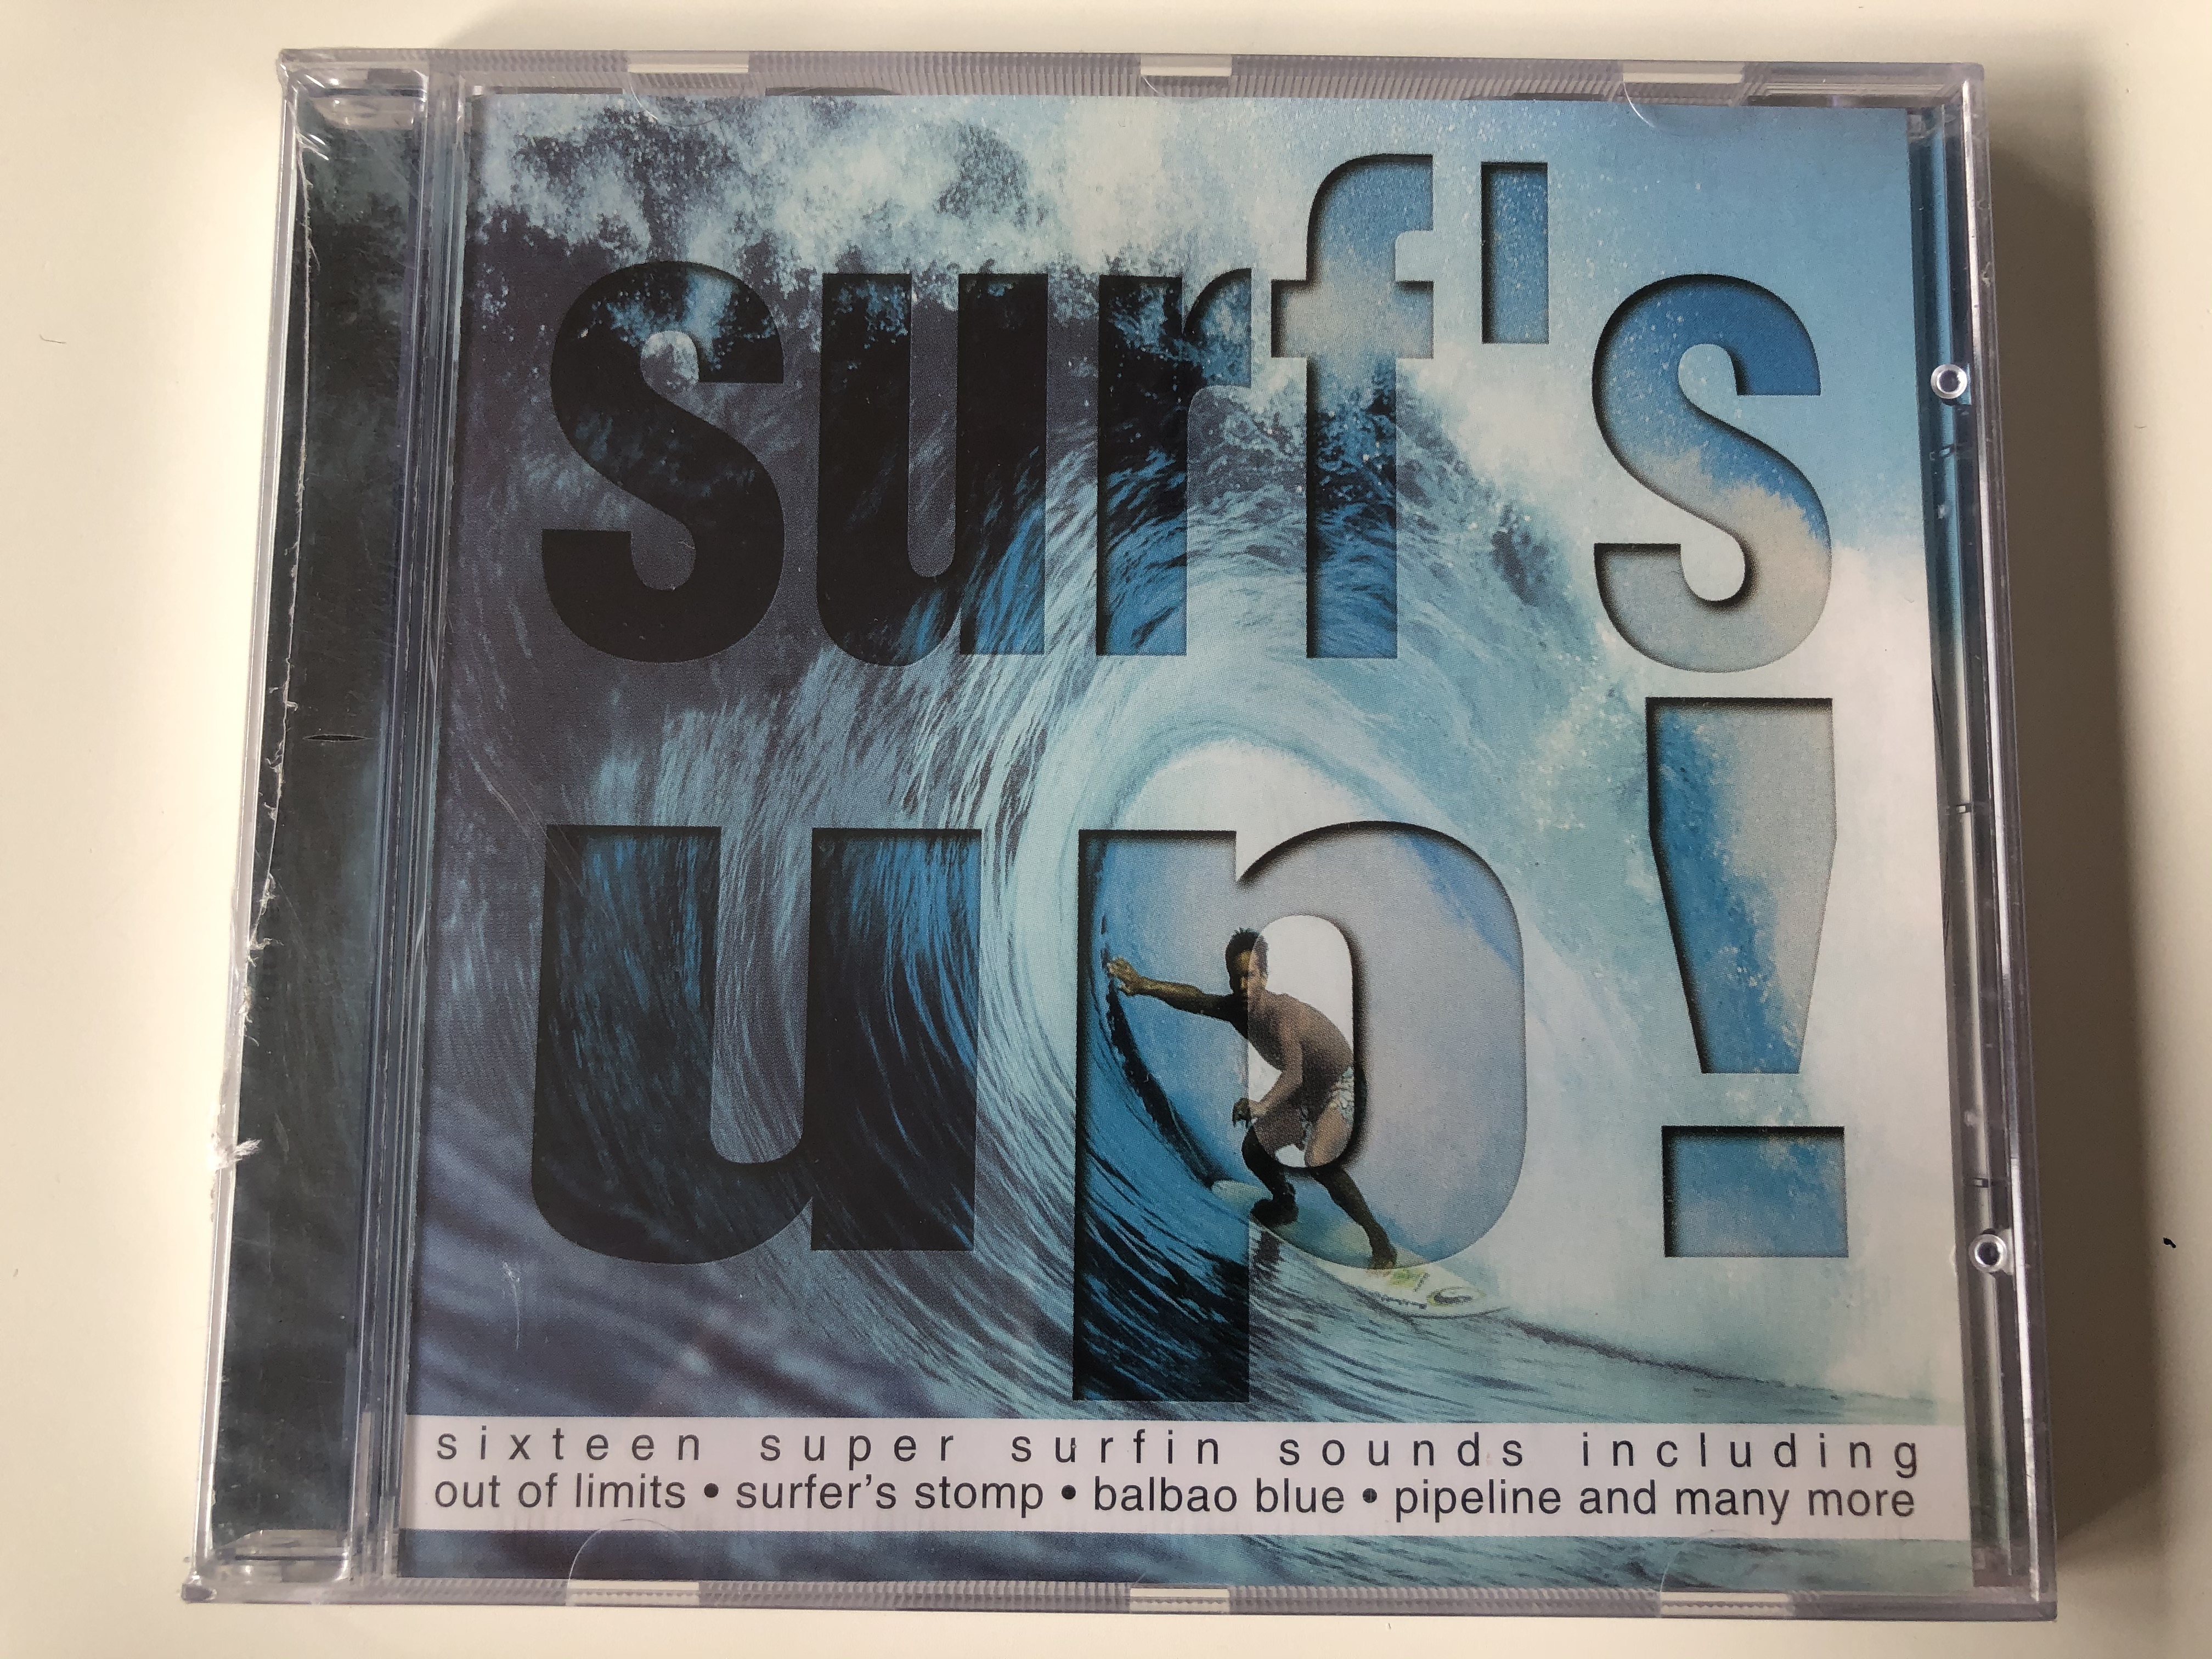 surfs-up-sixteen-super-surfin-sounds-including-out-of-limits-surfer-s-stomp-balbao-blue-pipeline-and-many-more-going-for-a-song-audio-cd-5033107110322-1-.jpg